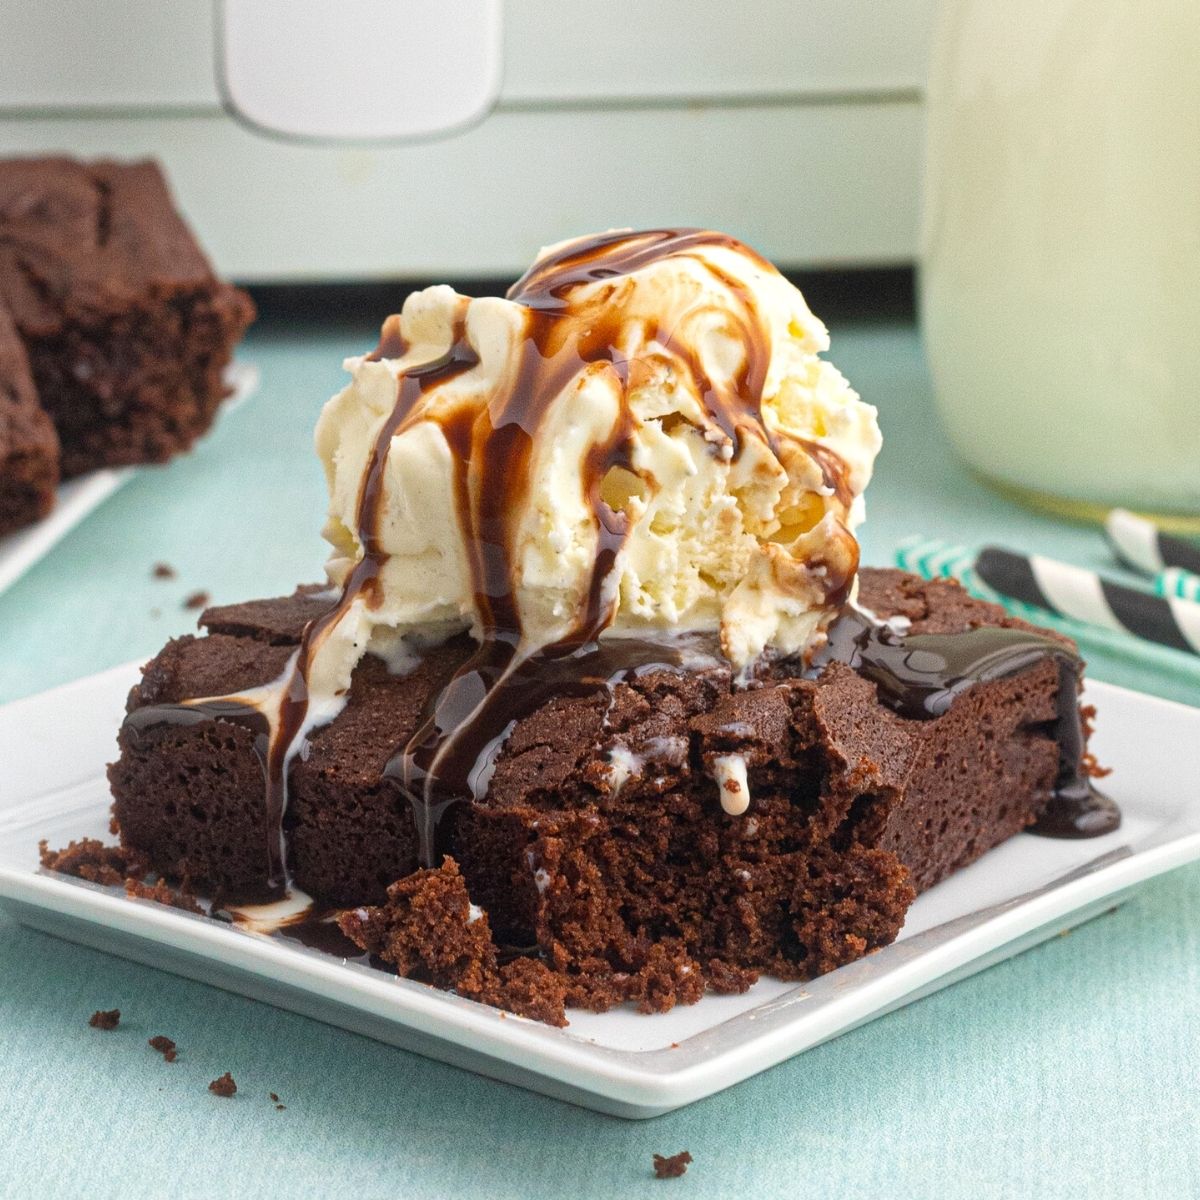 Air Fryer chocolate brownie on a white plate with ice cream and drizzled chocolate on top, with a bite out of brownie.